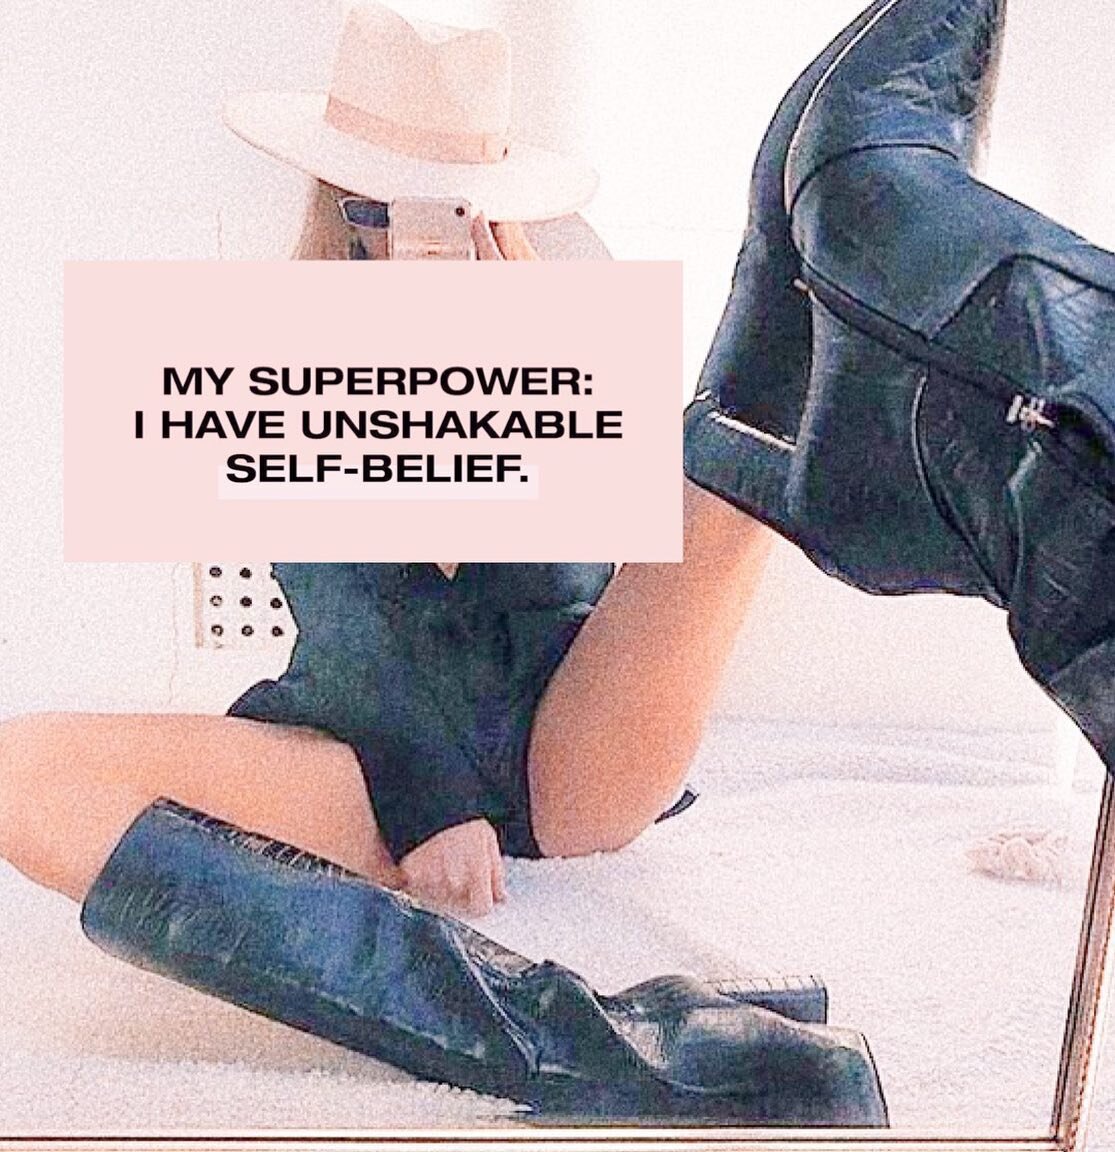 What&rsquo;s your superpower? ⚡️

cc: @bossbabe.inc